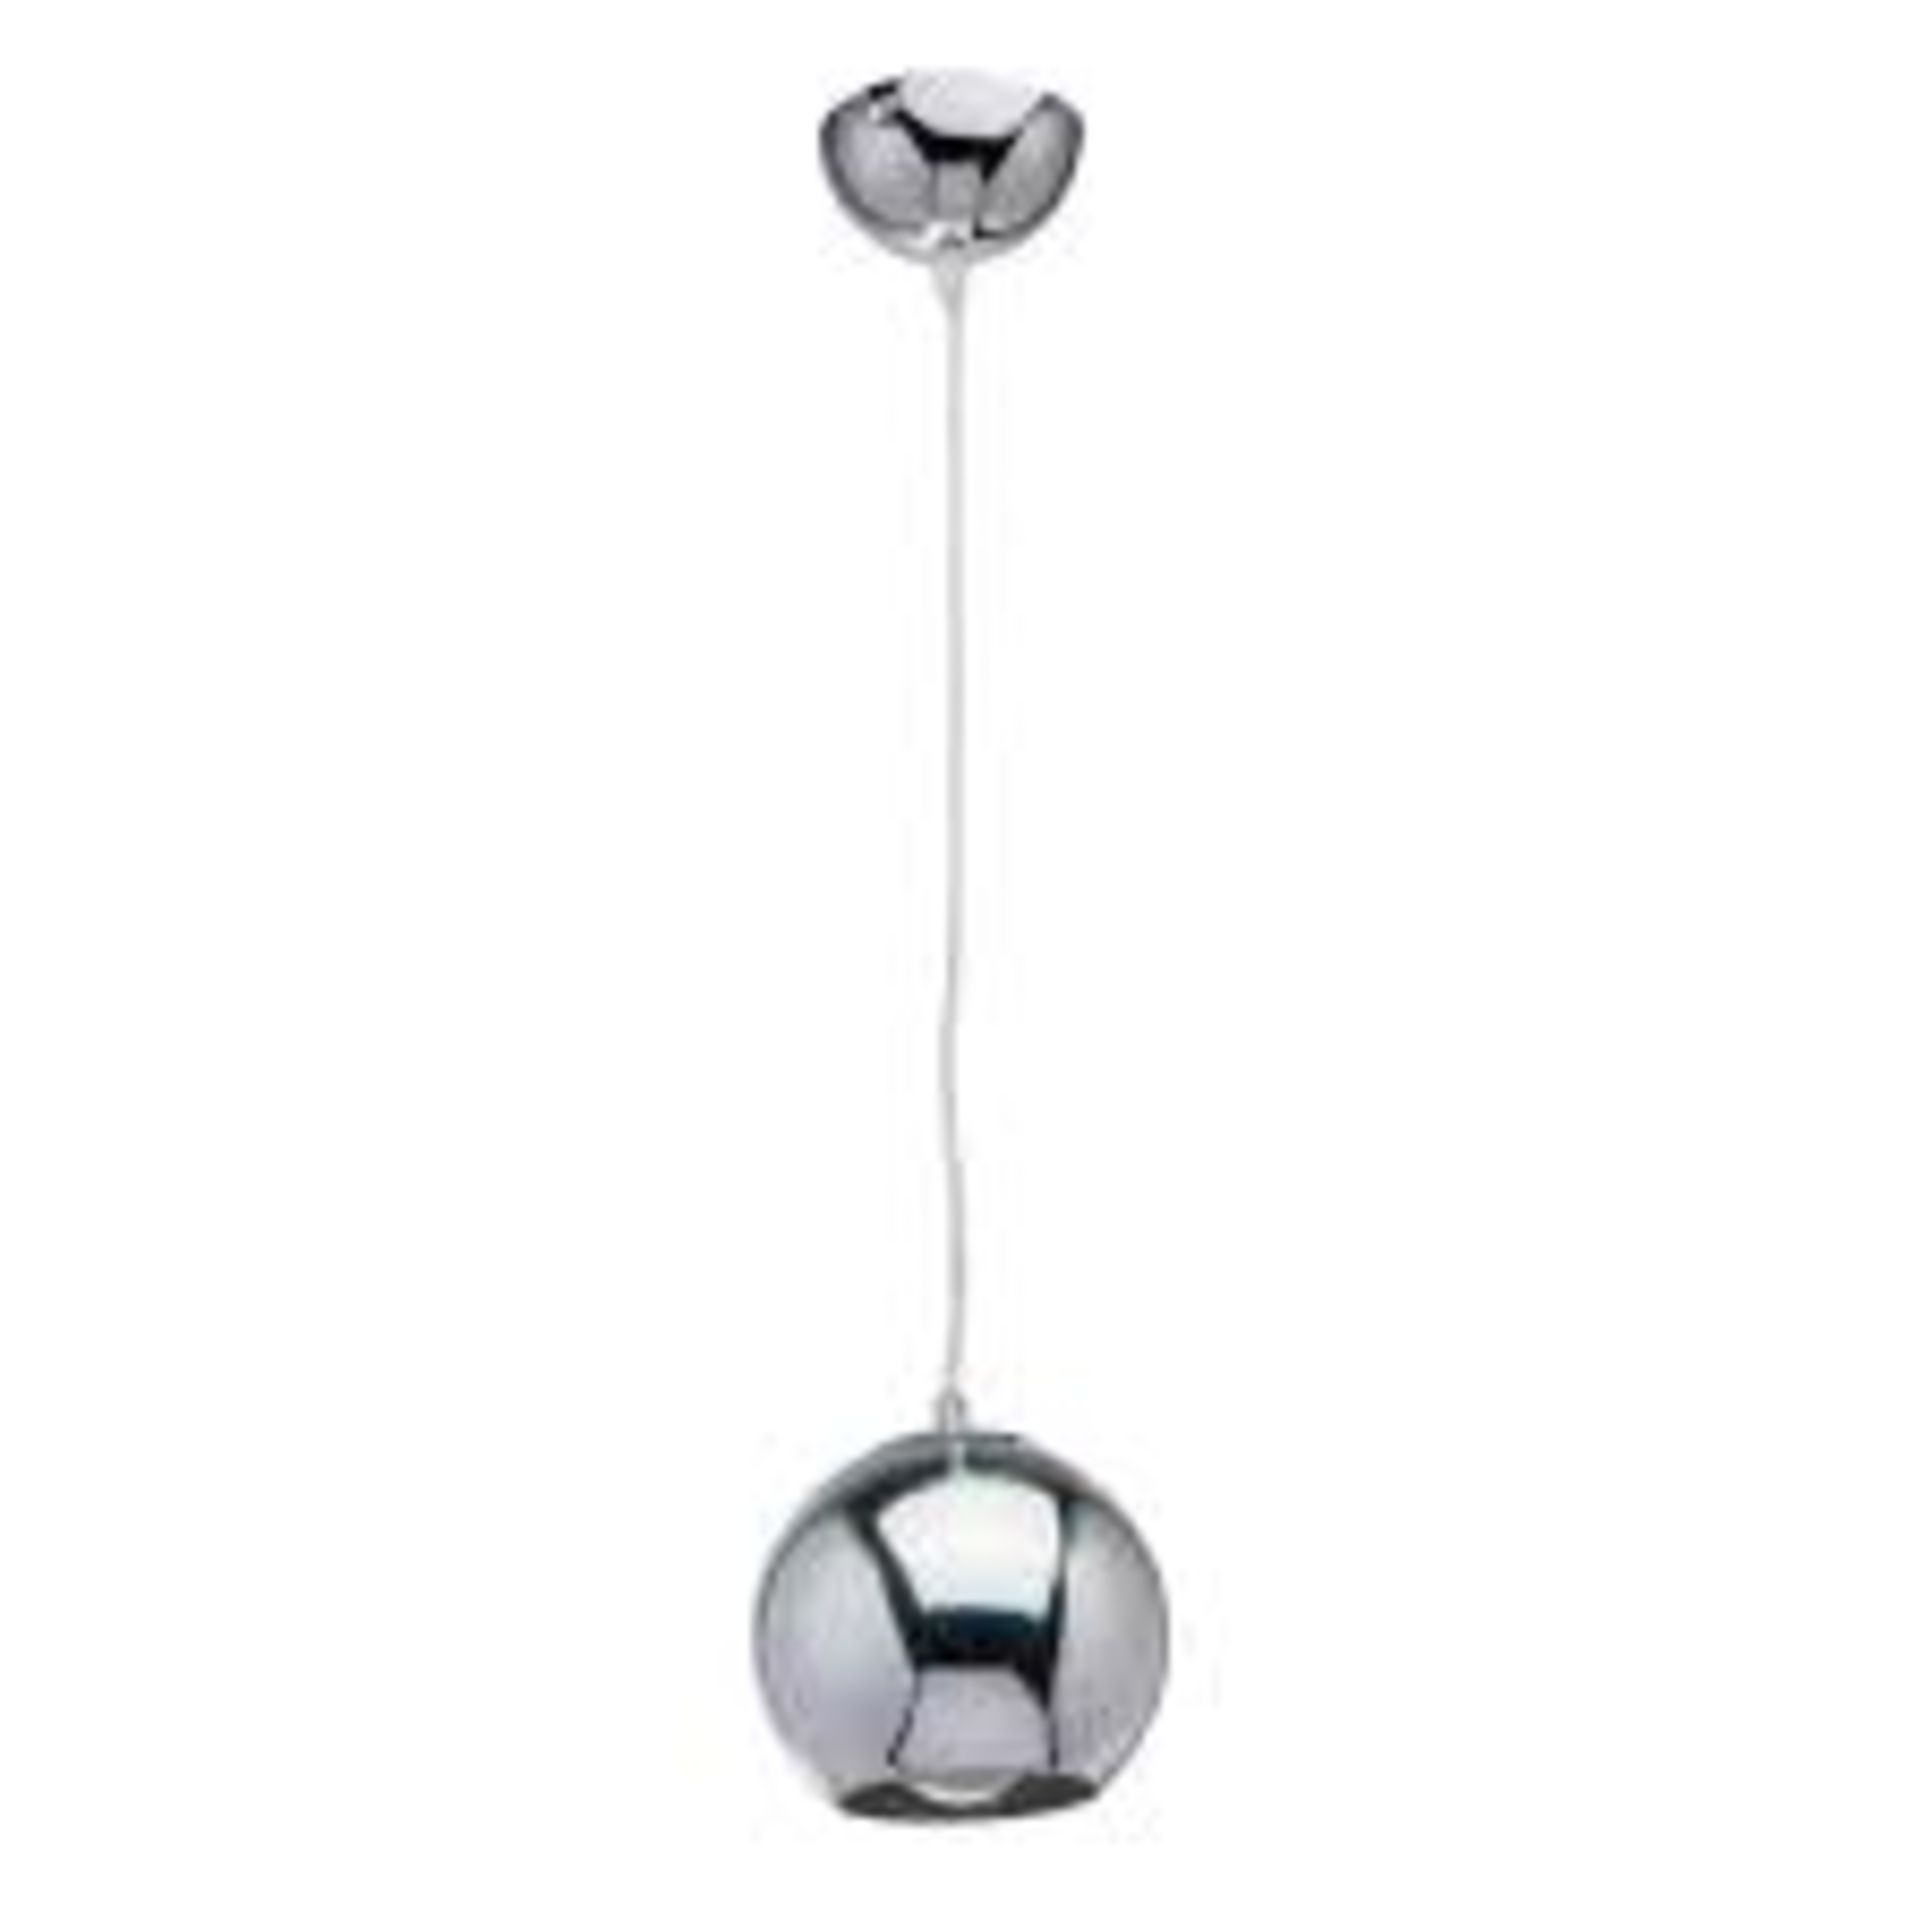 Boxed MW Lighting, Single Designer Ceiling Lights, RRP£70.00 (12598) (Public Viewing and